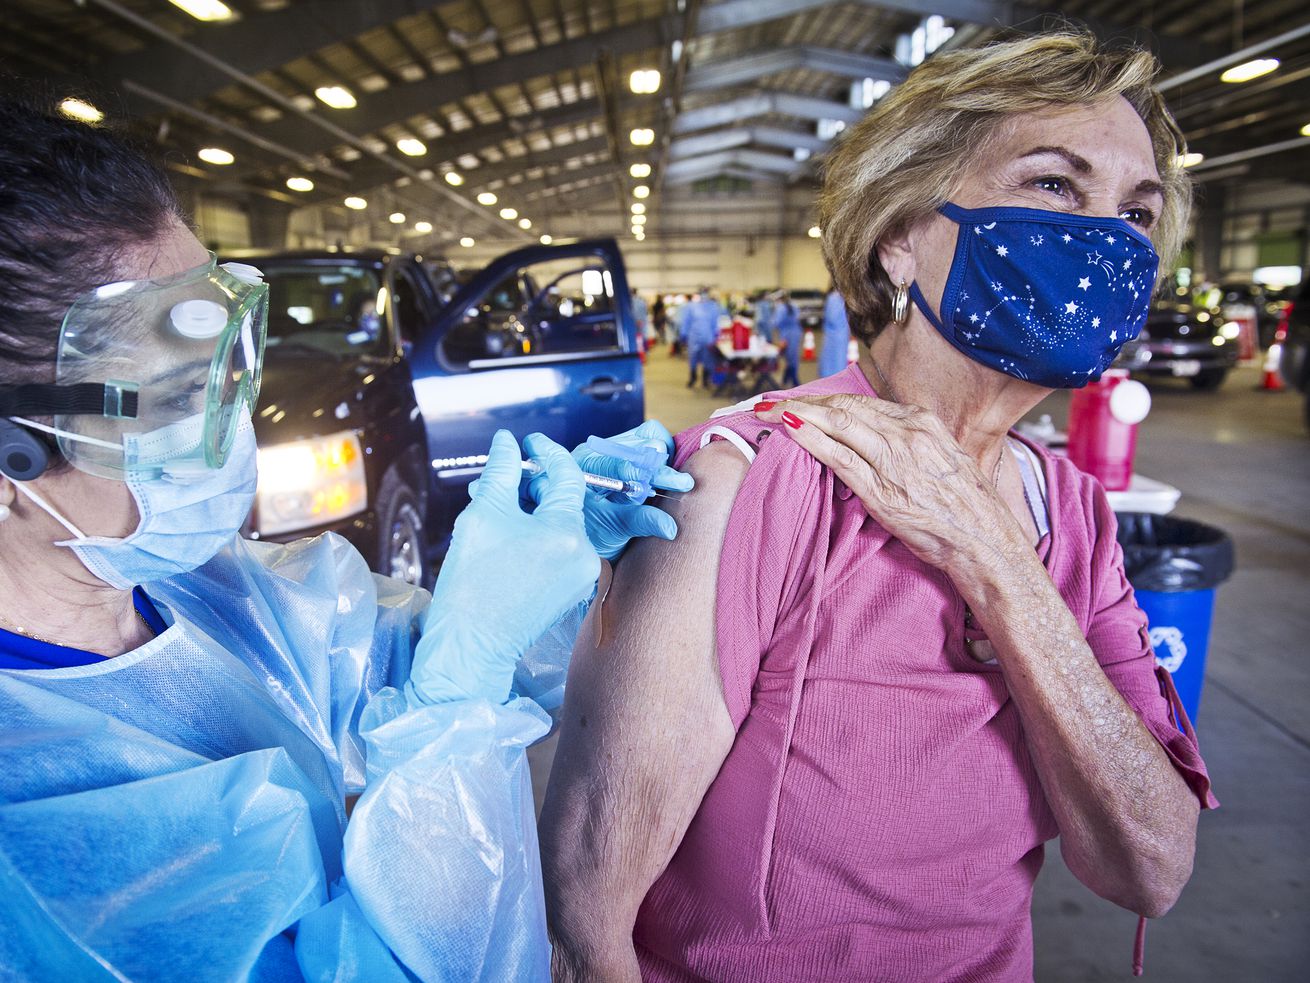 A health care worker giving a masked person a shot in the arm.